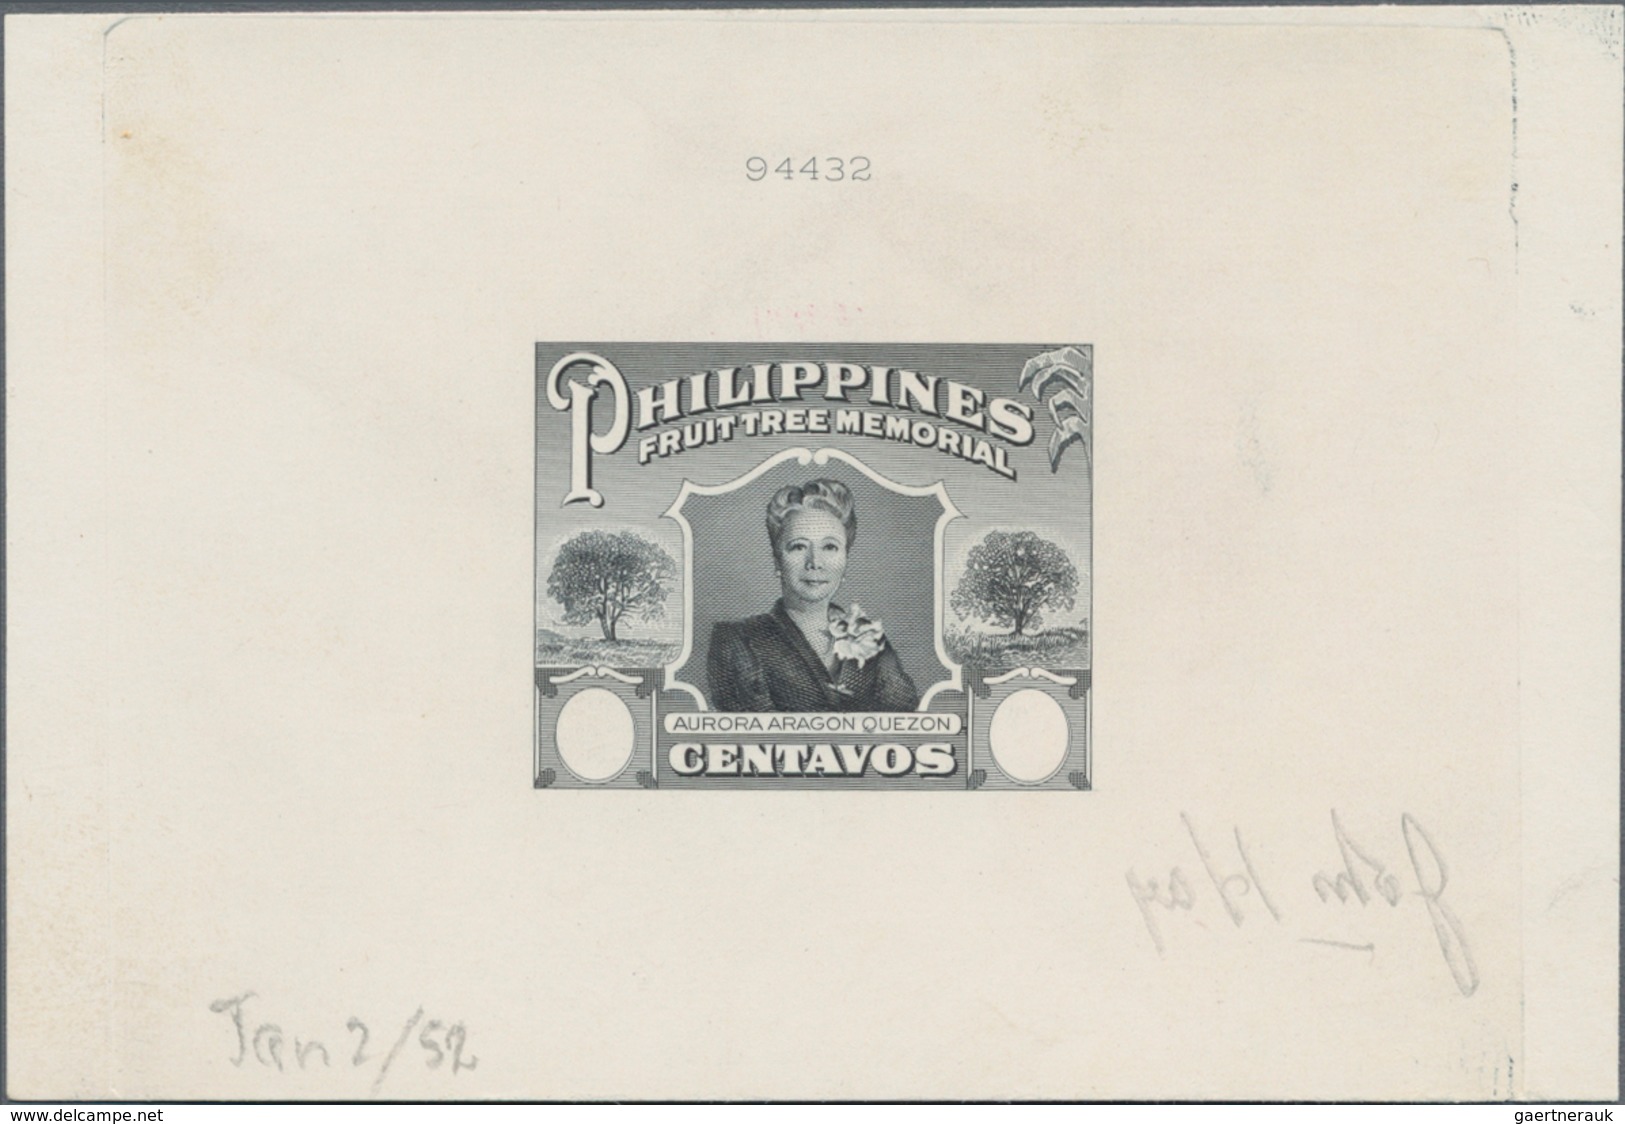 Philippinen: 1952, Fruit Tree Memorial "Aurora A. Quezon", Group Of Four ABN Single Die Proofs (thre - Philippinen